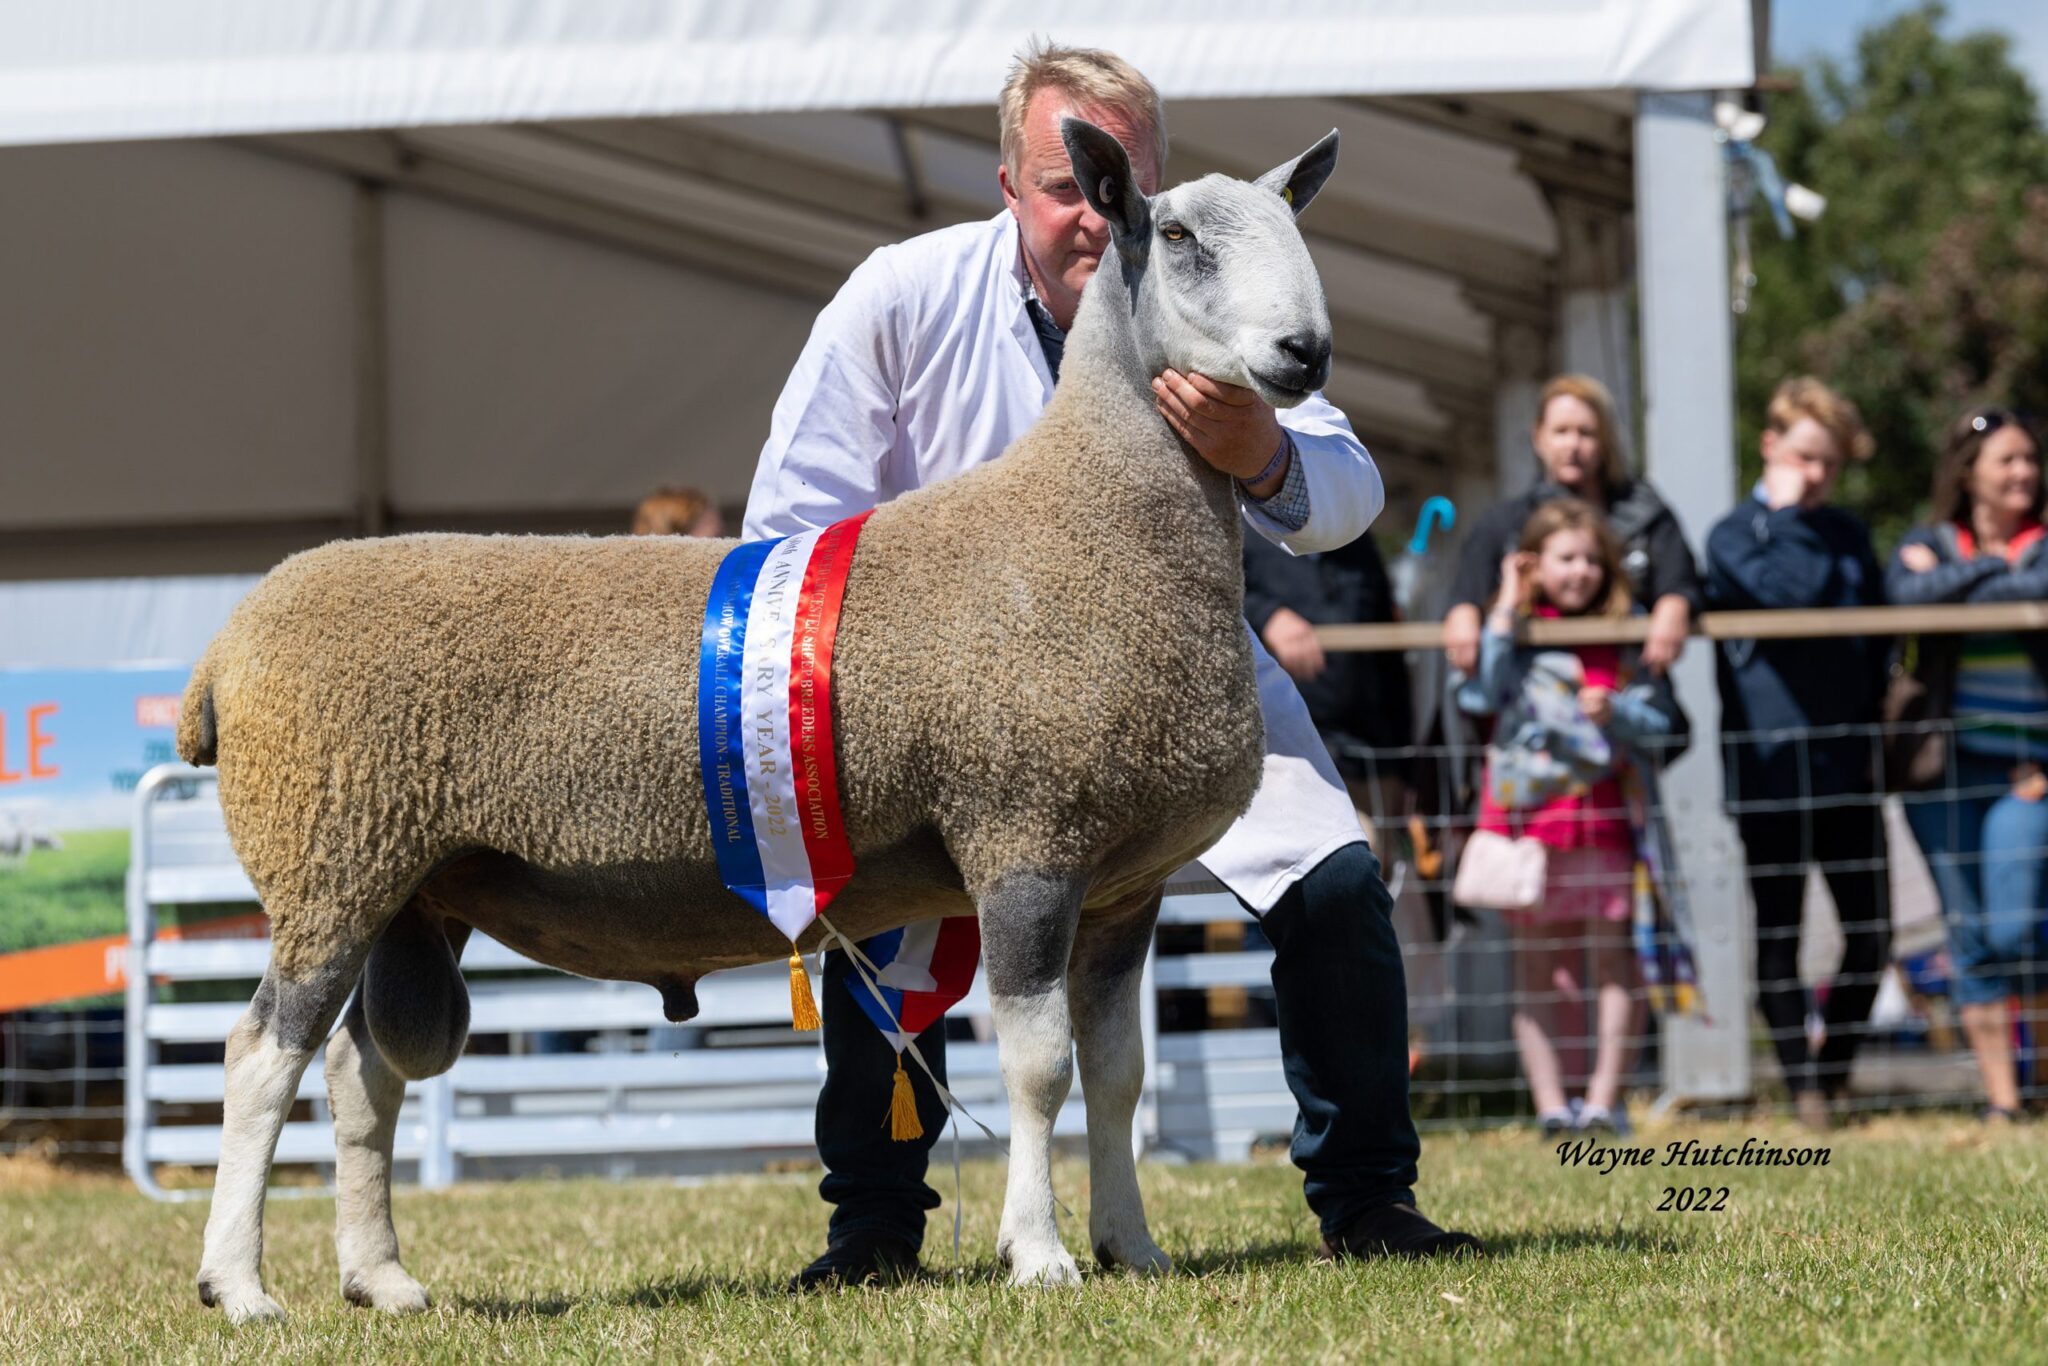 Royal Highland Show – Traditional Type Show Results